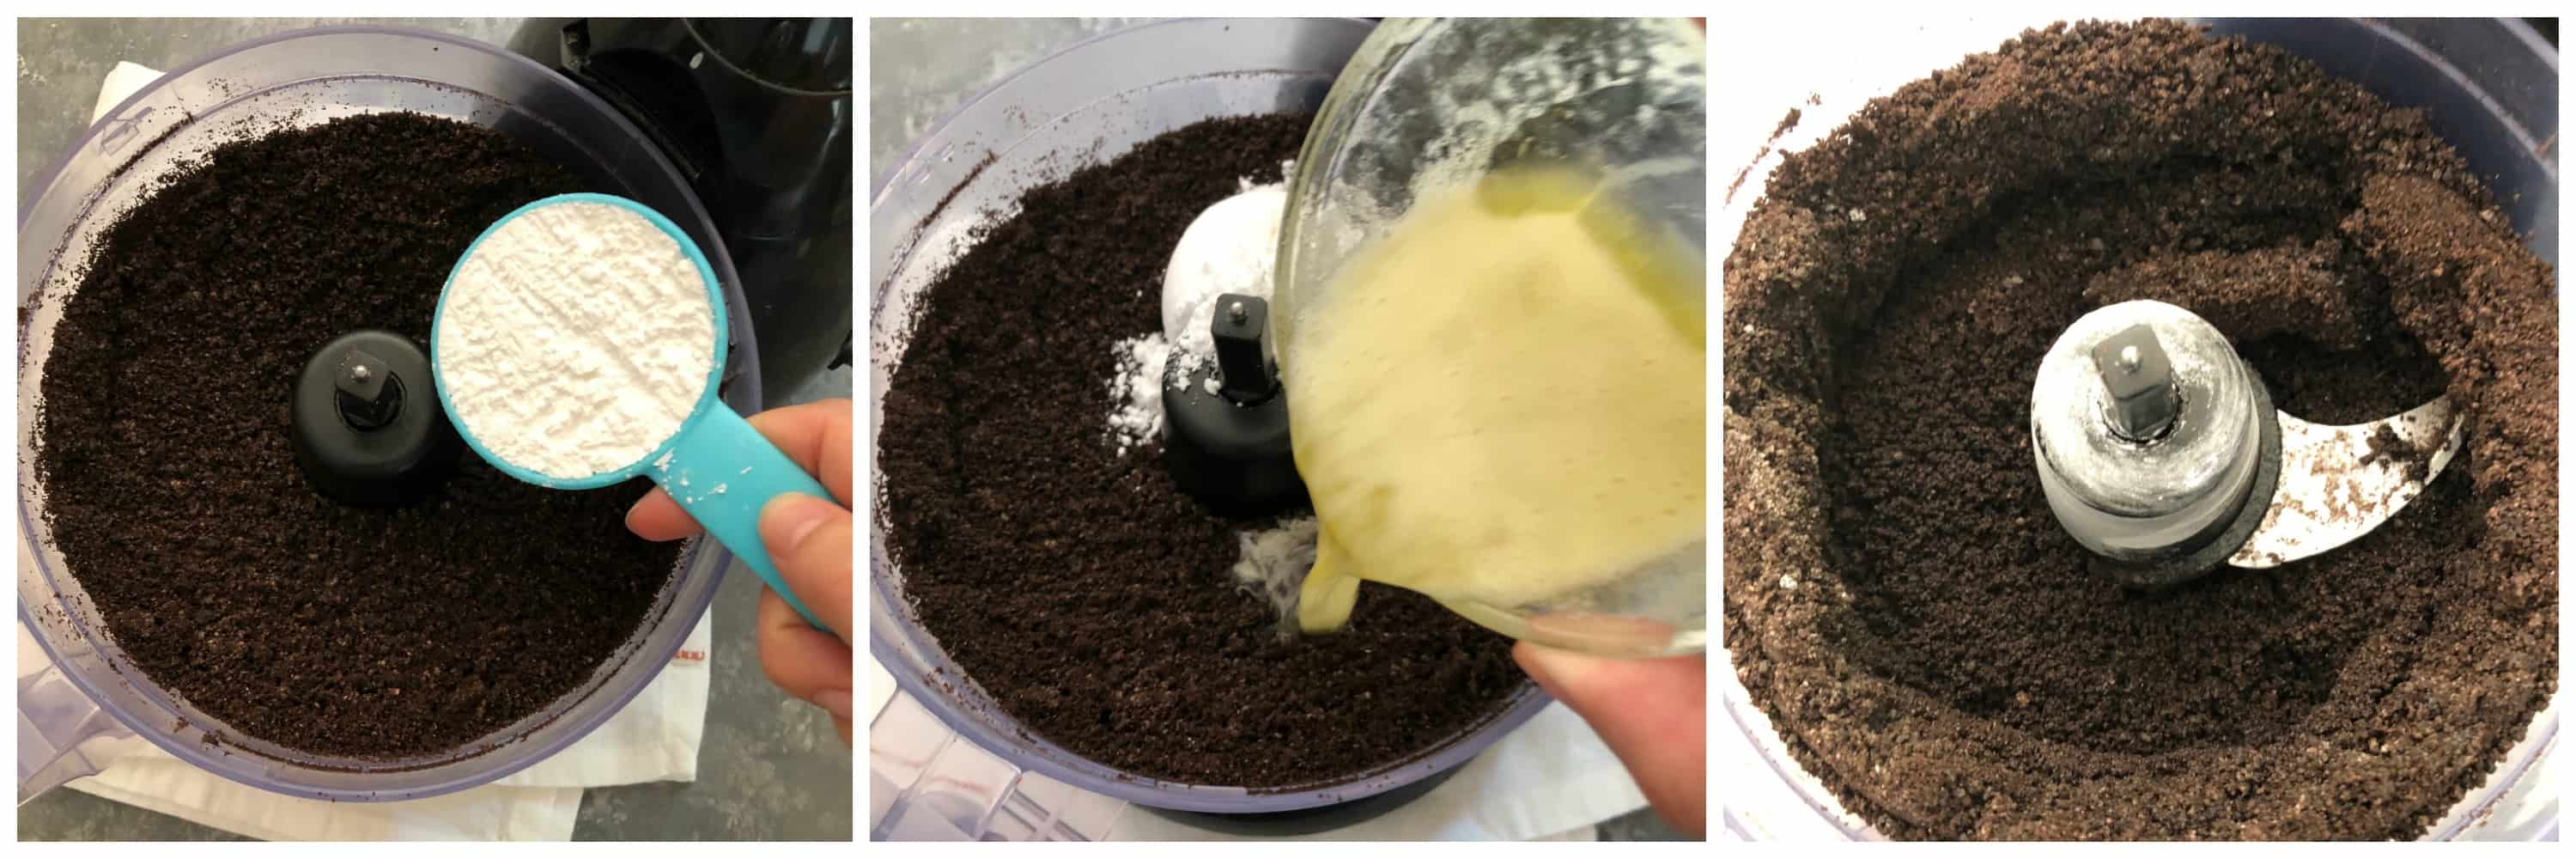 Powdered sugar and melted butter added to oreo crumbs in food processor